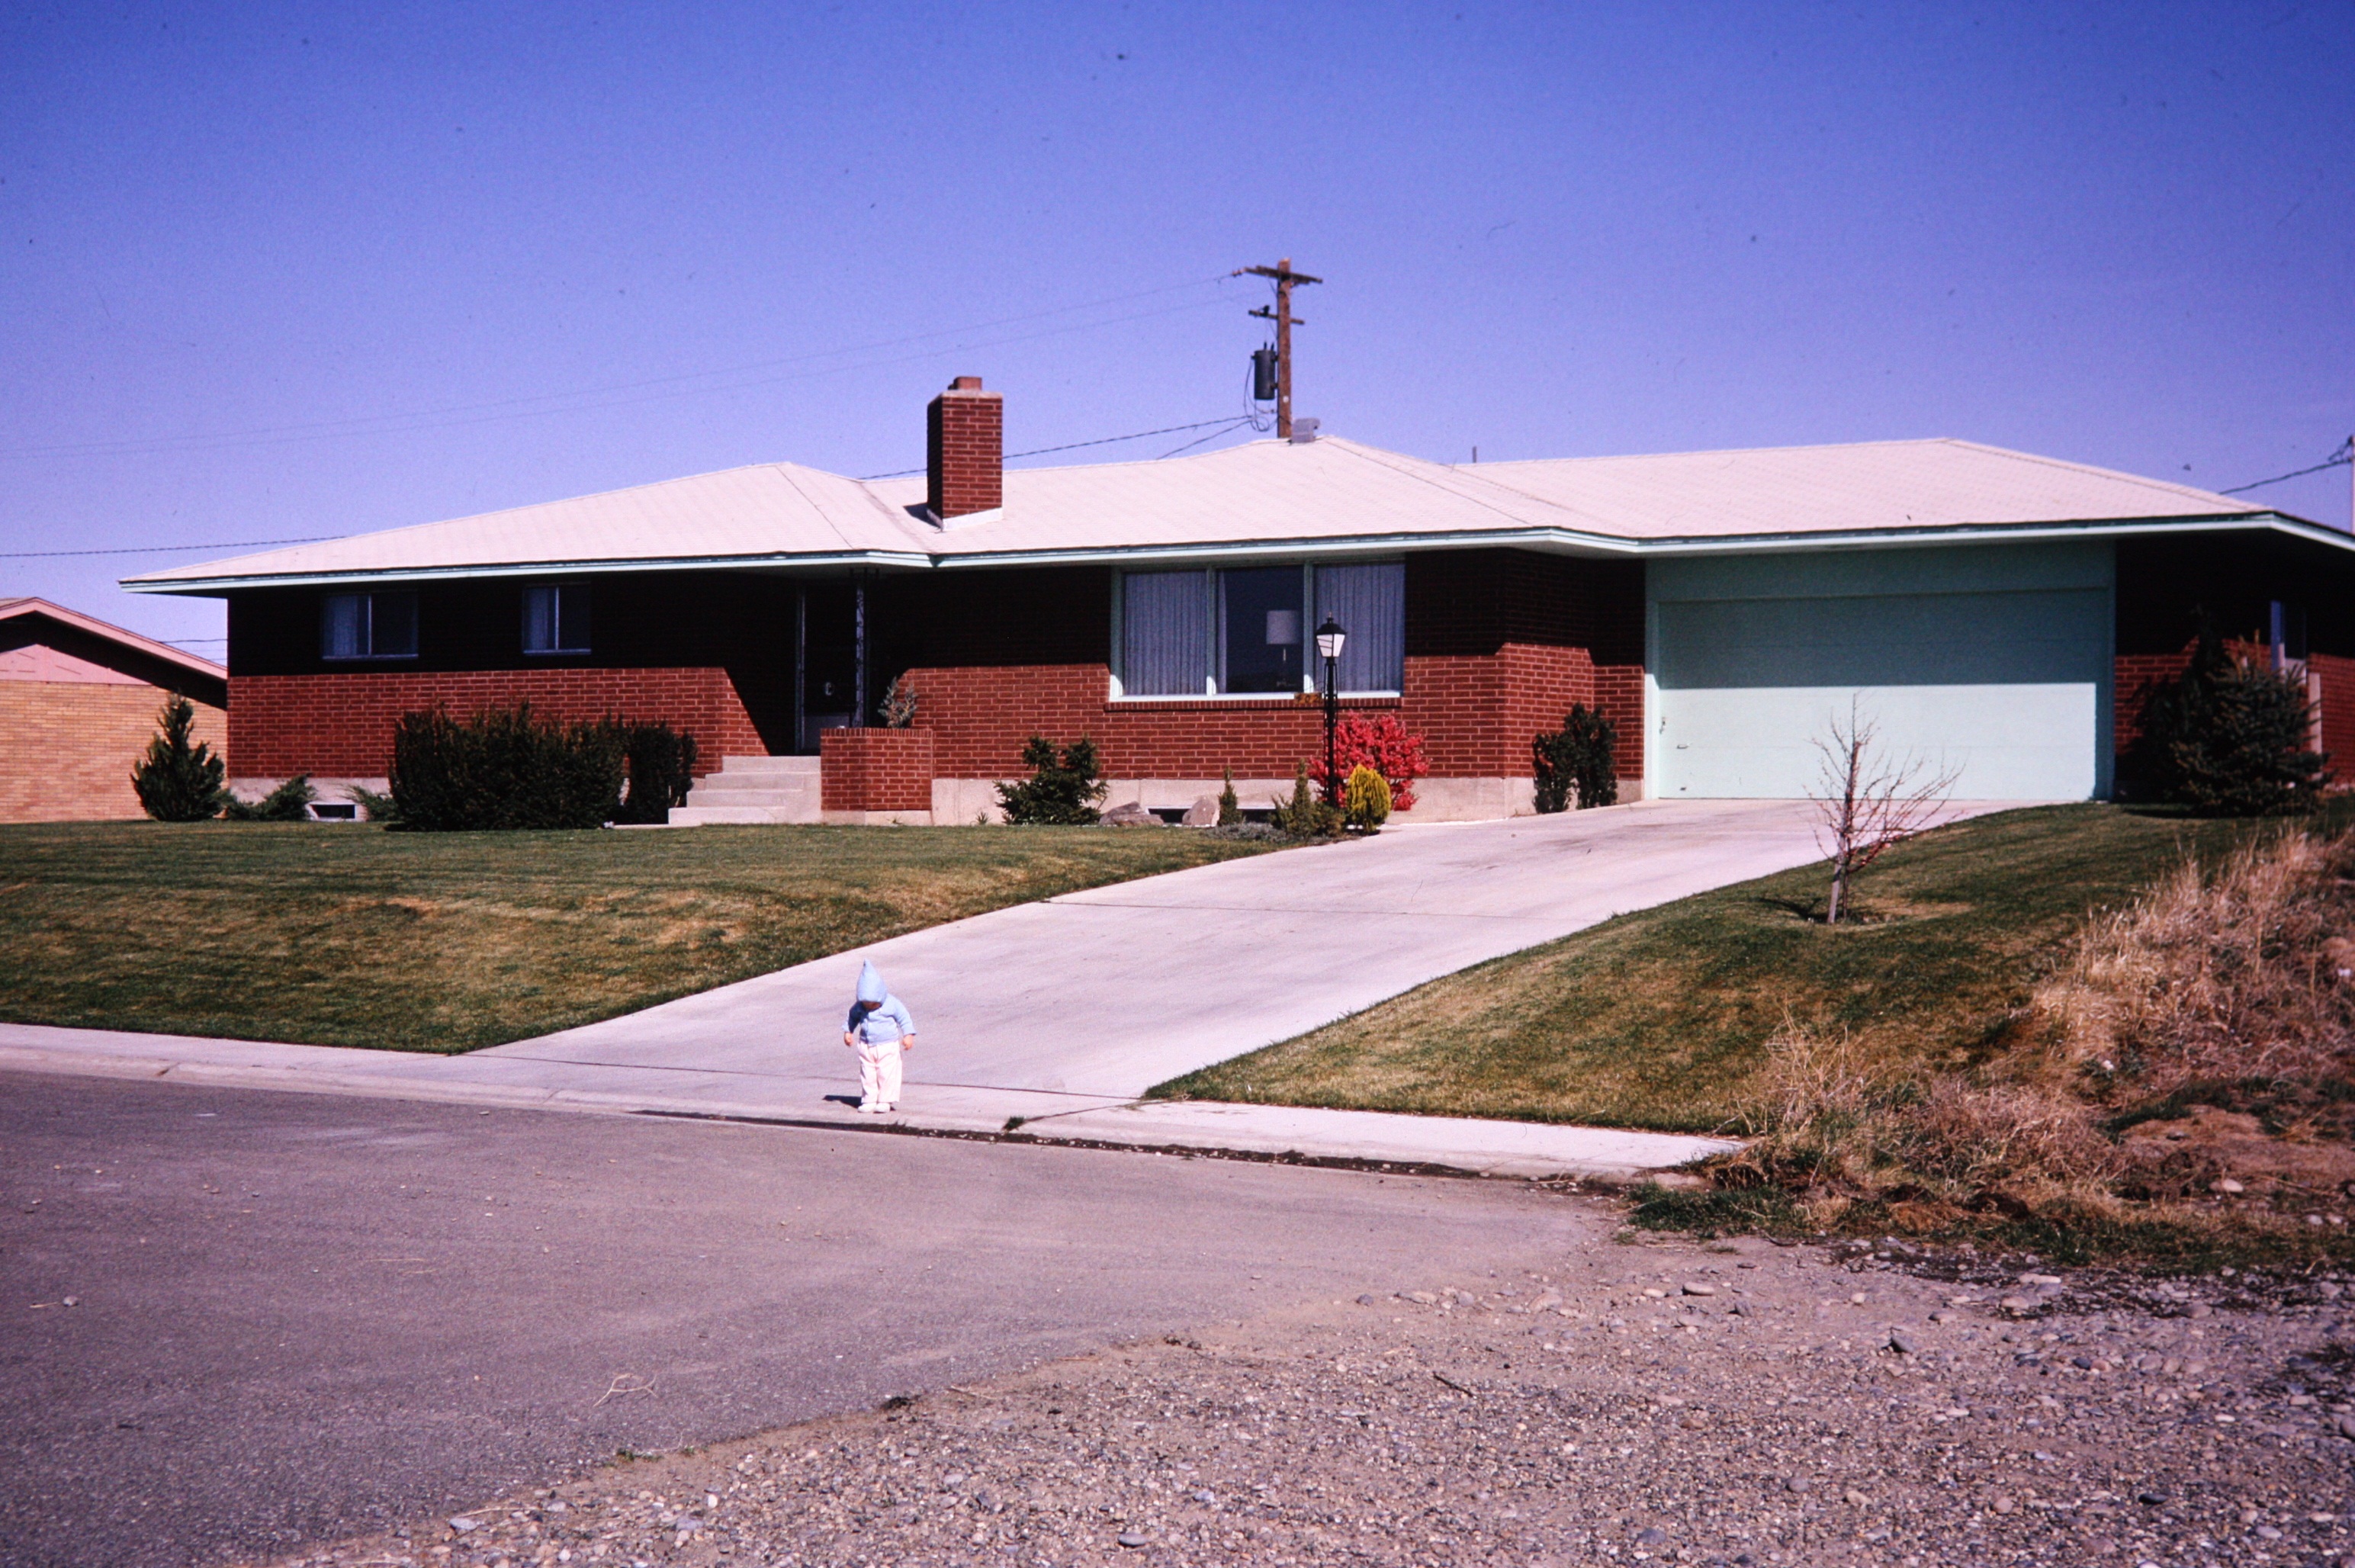 My parents' home in Richland